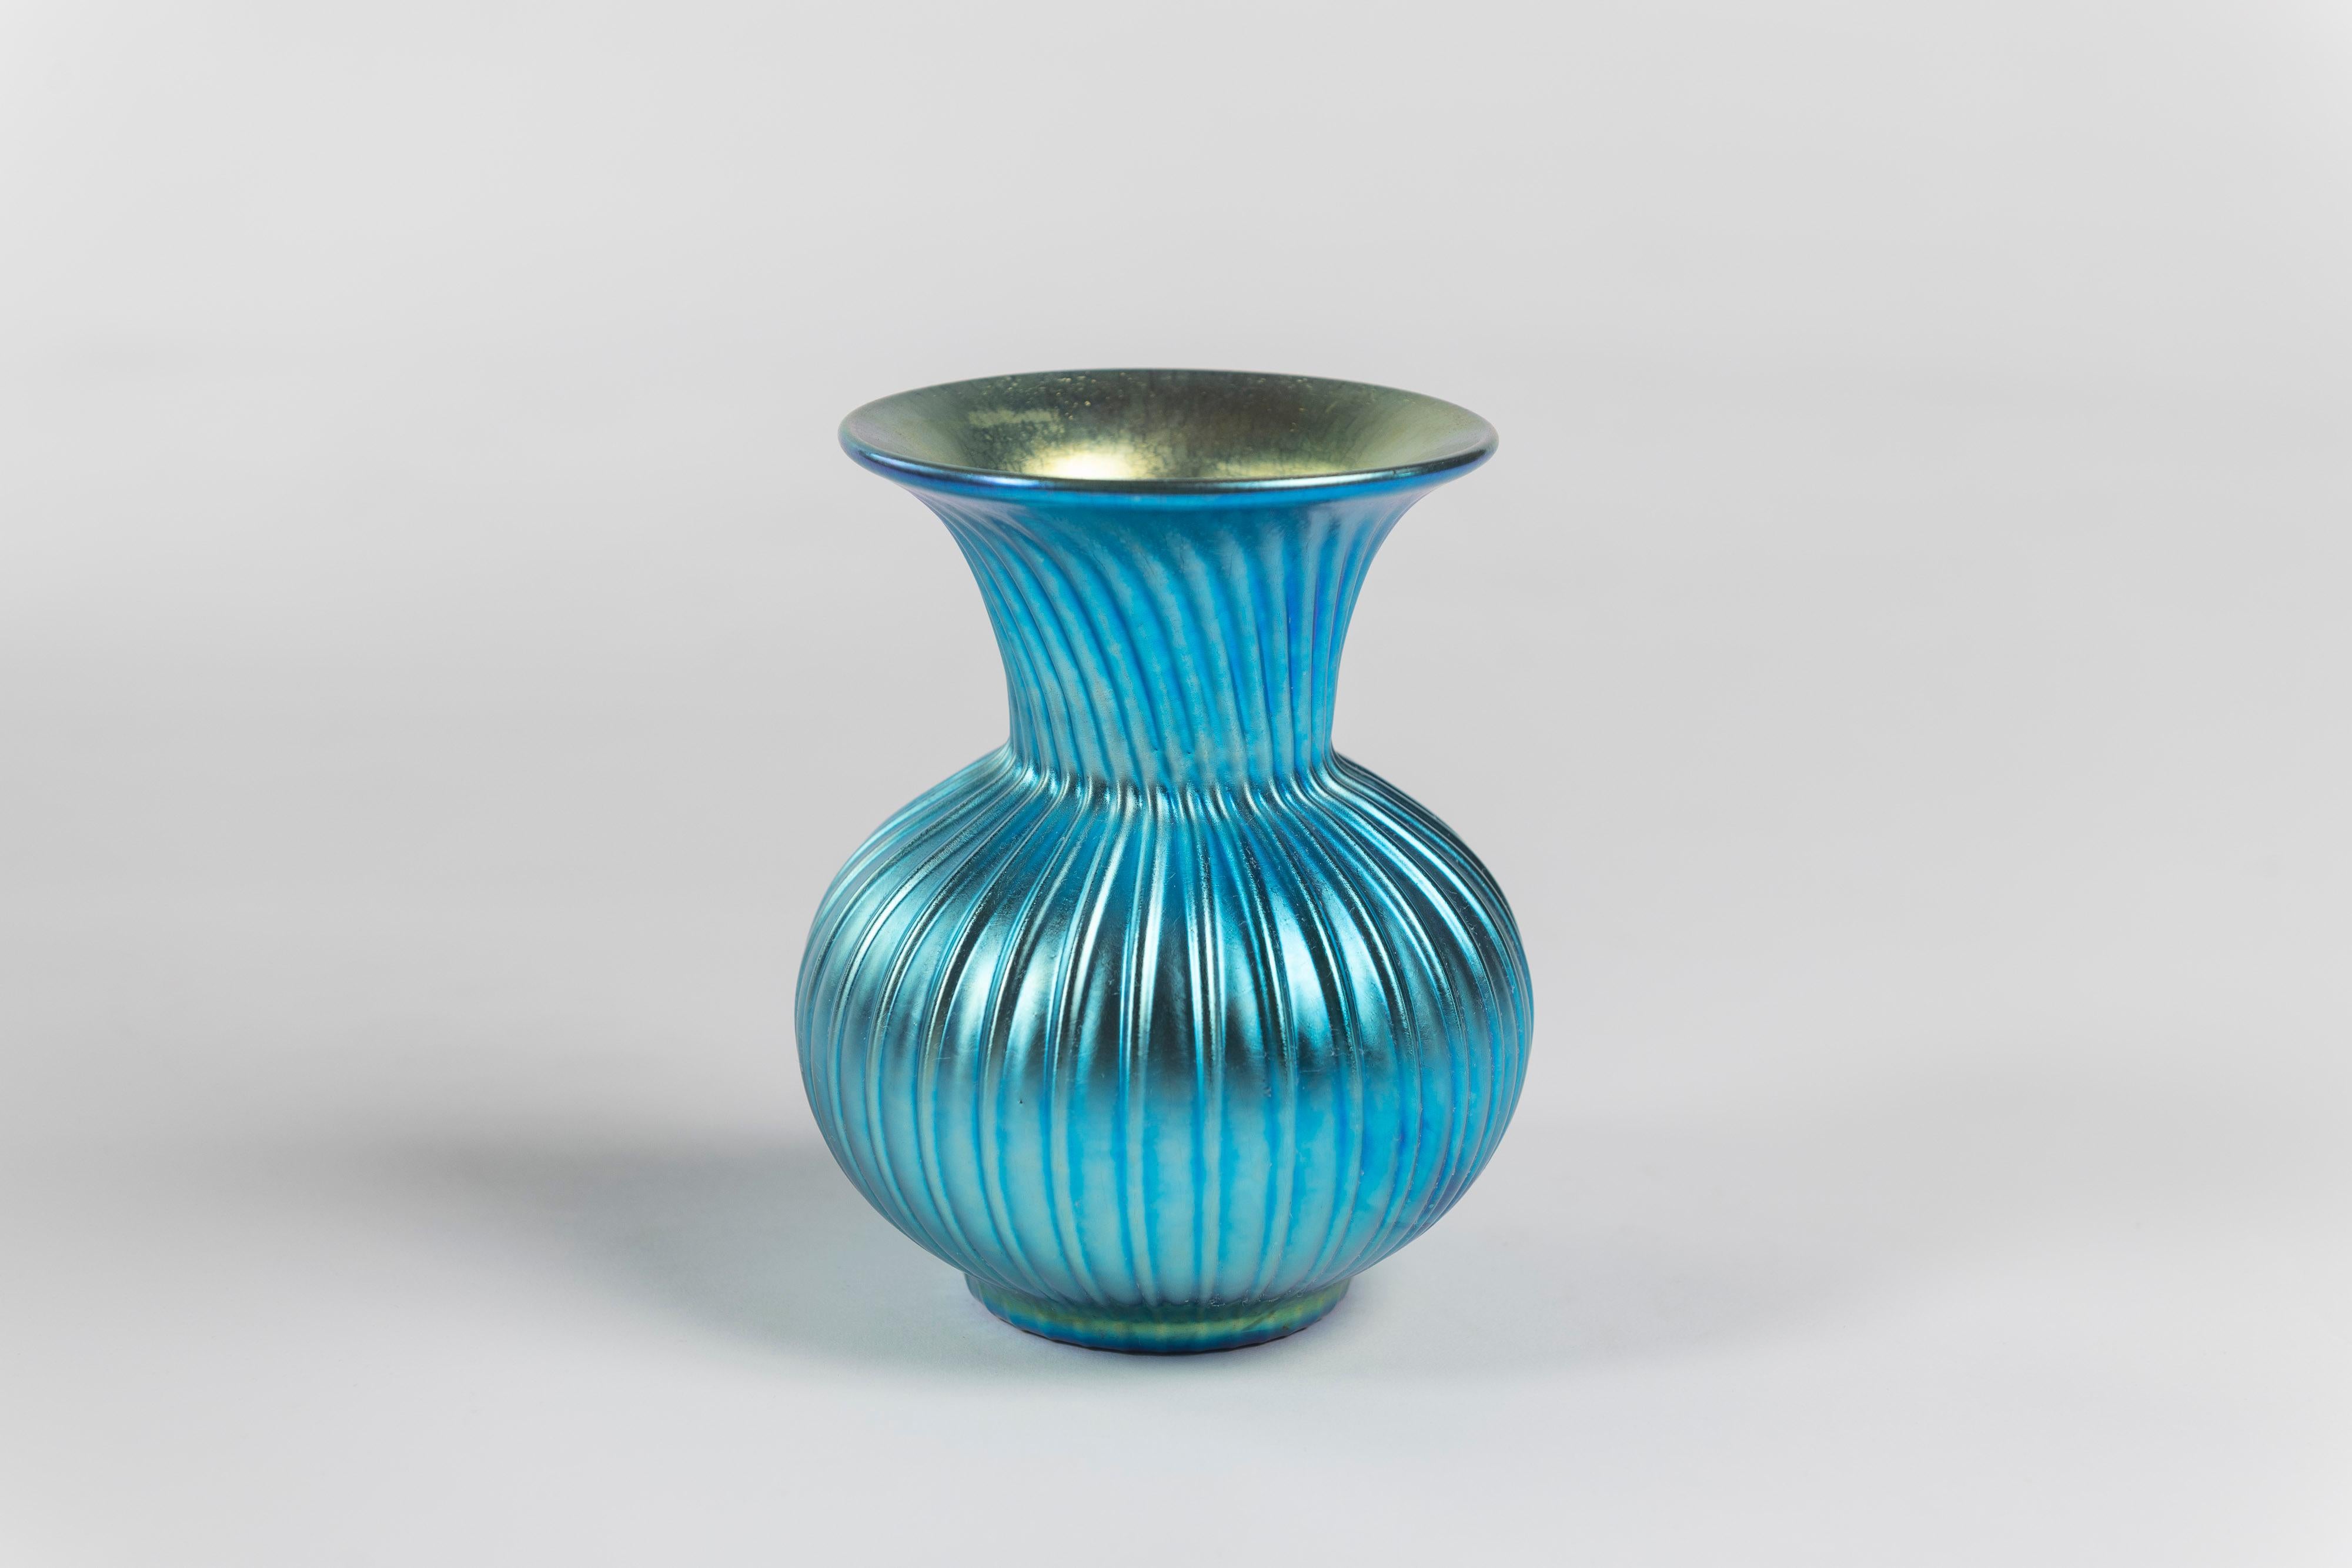 Small iridescent bulbous vase with ribbed body in blue aurene, made in 2006 and signed by Lundberg Studios of California. Very good quality and condition.